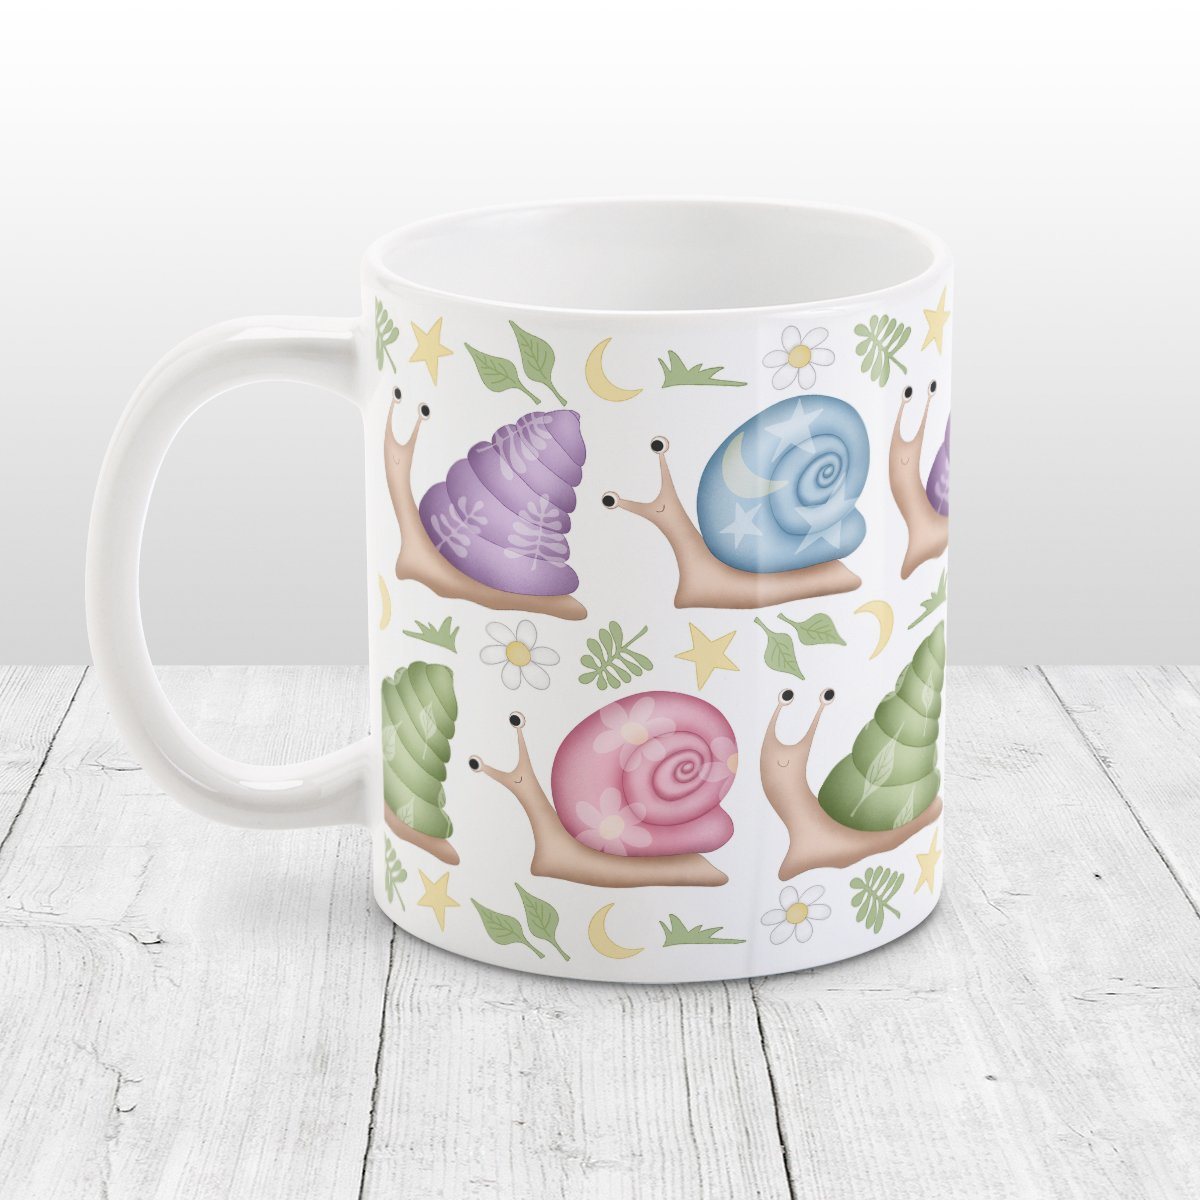 Cute Spring Summer Snails Pattern Mug at Amy's Coffee Mugs. A cute snails mug with a whimsical pattern of snails with happy faces in two rows around the mug with pink, purple, blue, and green shells floral and stars watermarks, with foliage, moons, and stars between the rows.